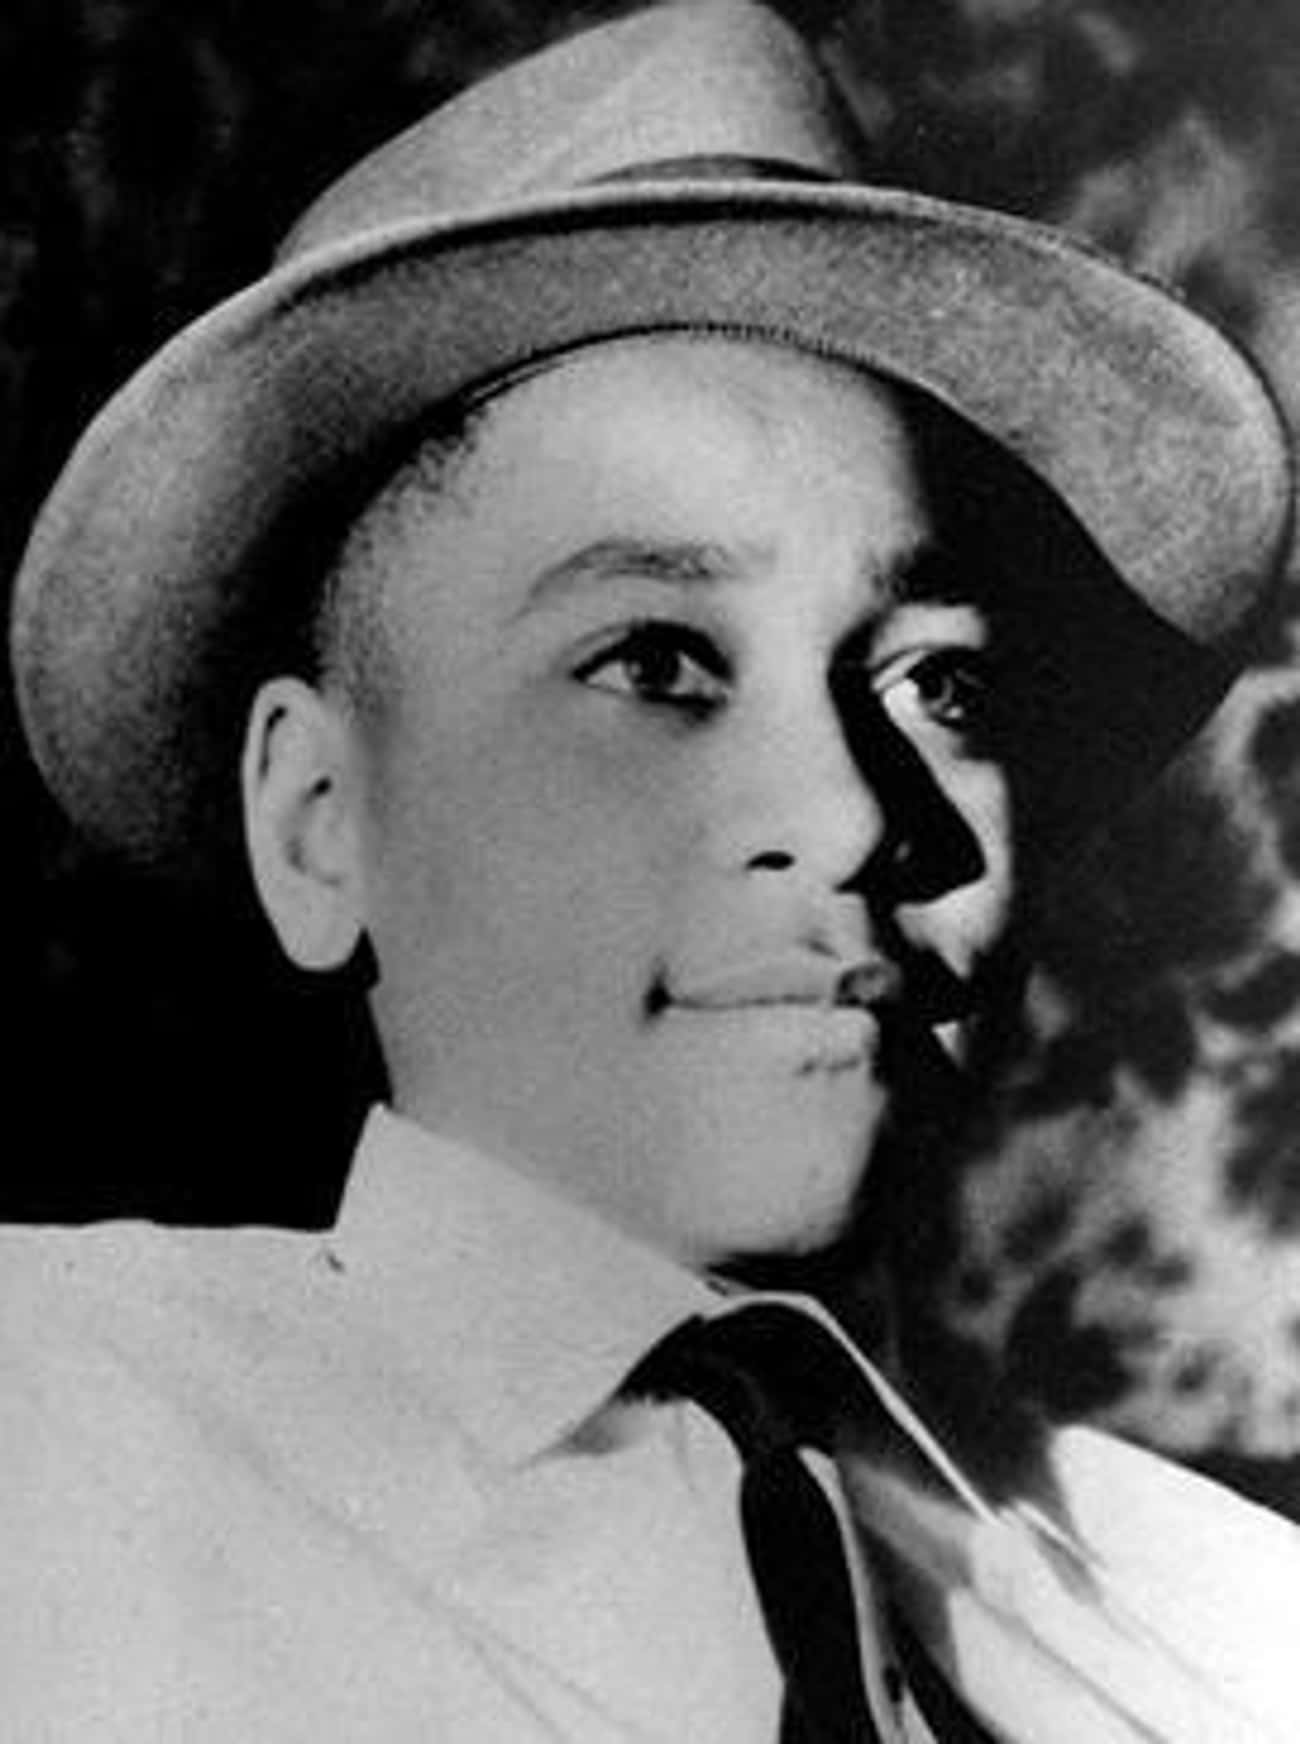 Emmett Till Was Murdered After A White Woman May Have Lied About Him